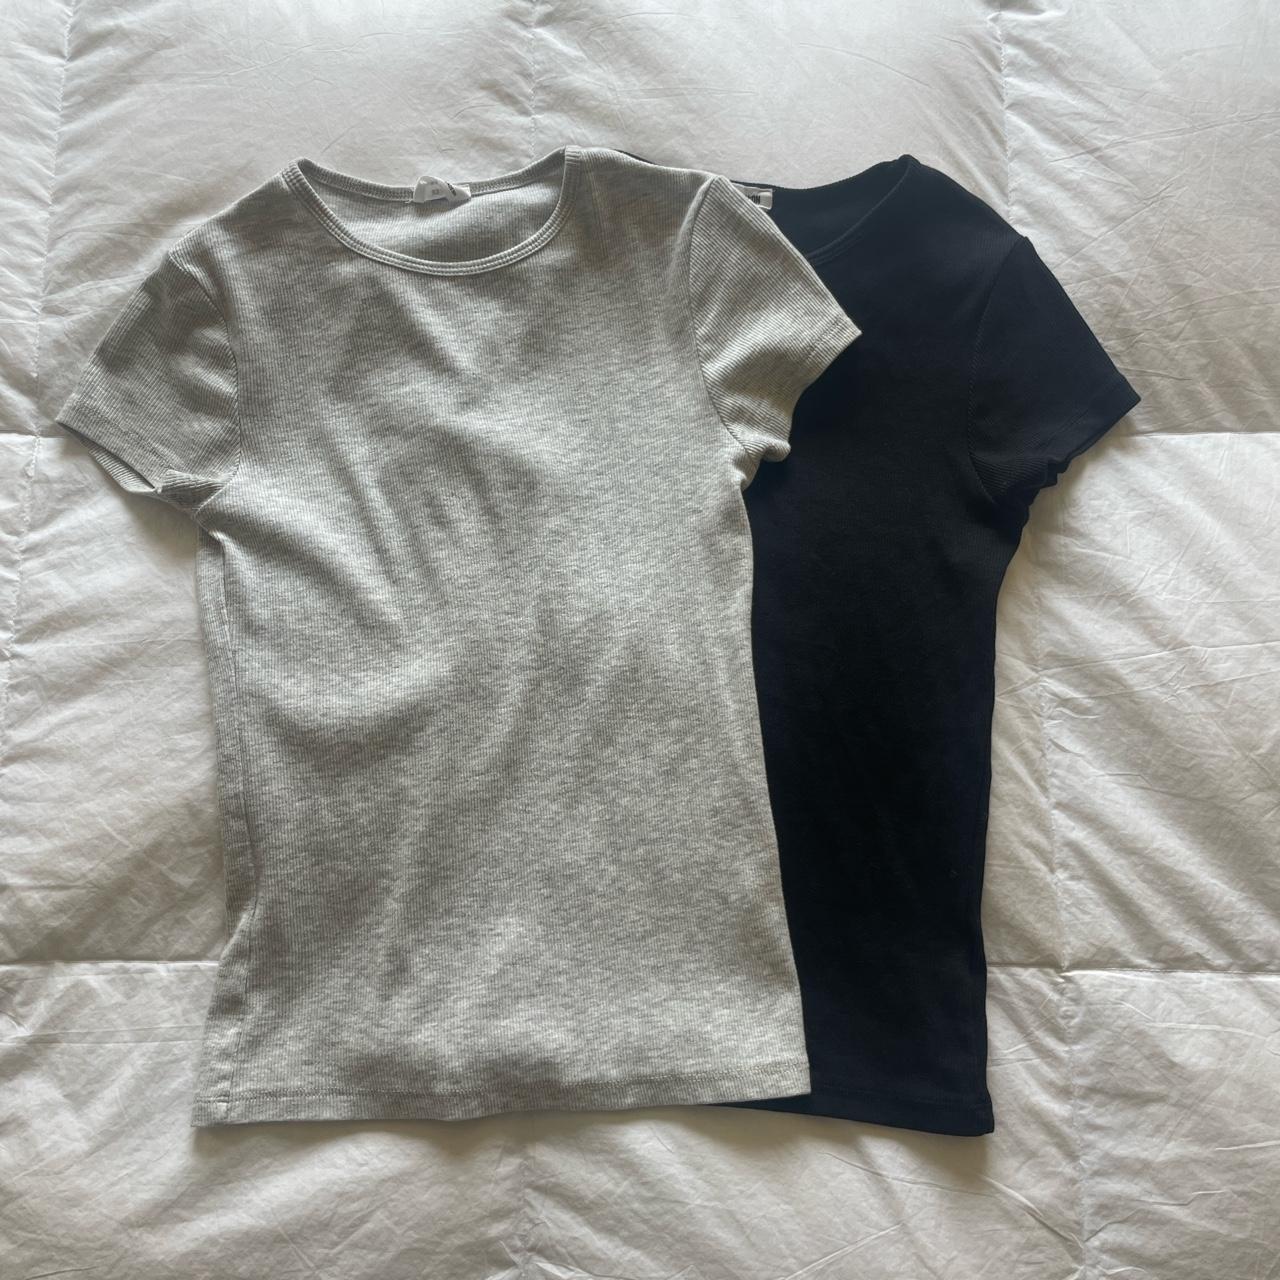 Cotton On Women's Grey and Black T-shirt